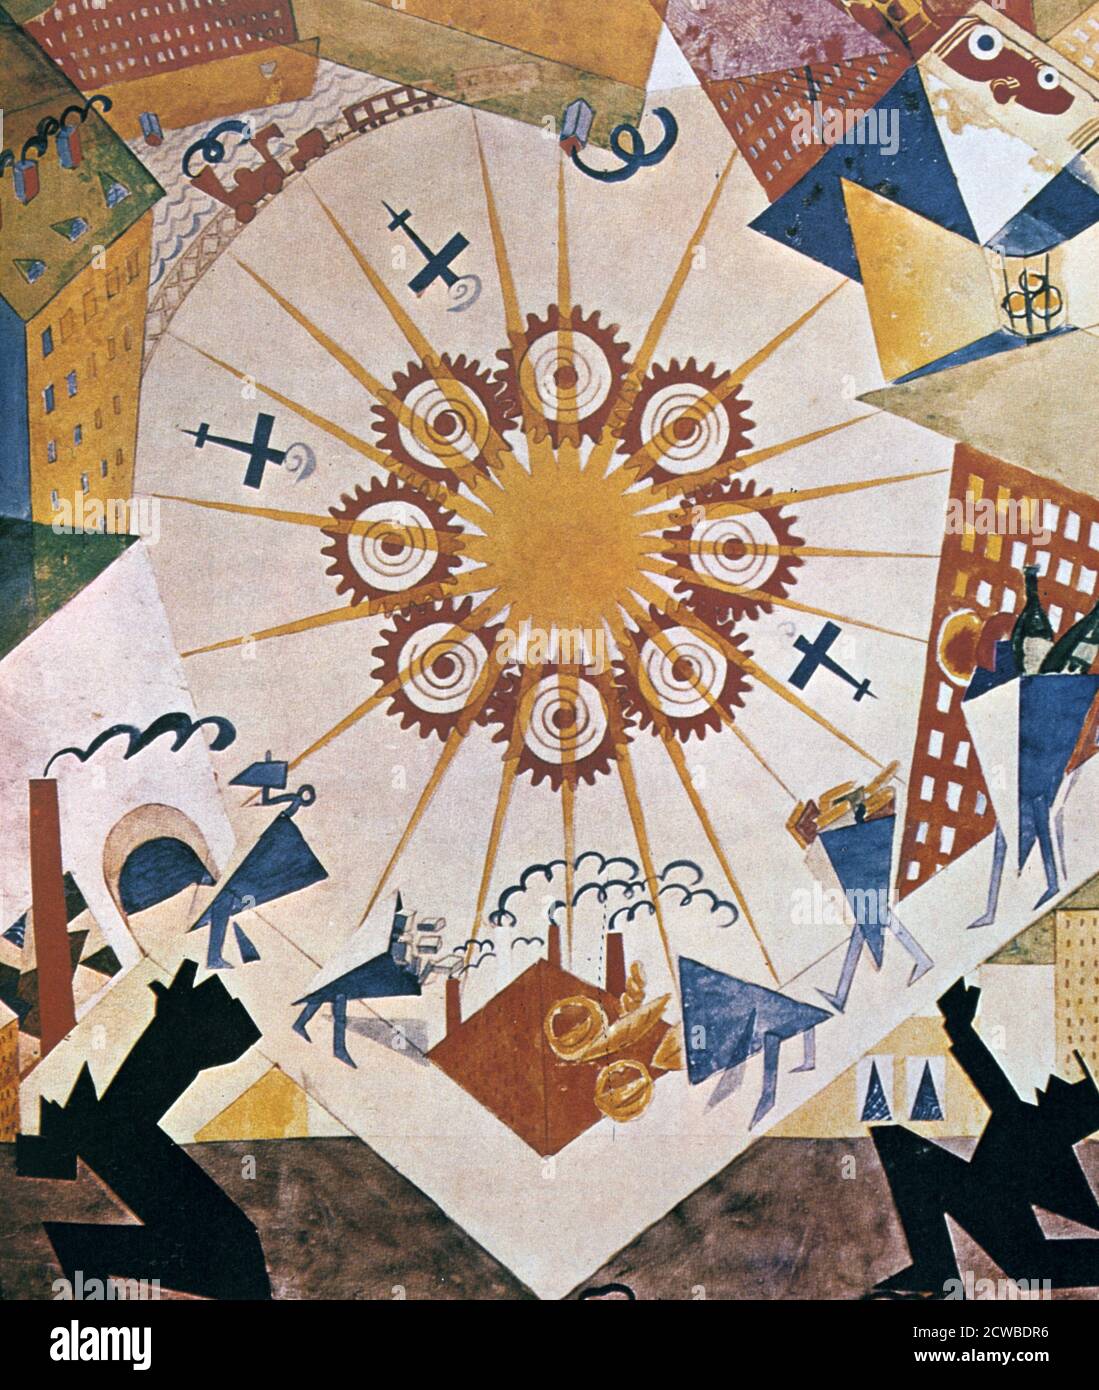 Decor design for 'Mystery Bouffe', 1919. Artist: Vladimir Mayakovski. Vladimir Vladimirovich Mayakovski (1893-1930) was a Soviet poet, playwright, artist, and actor. Stock Photo